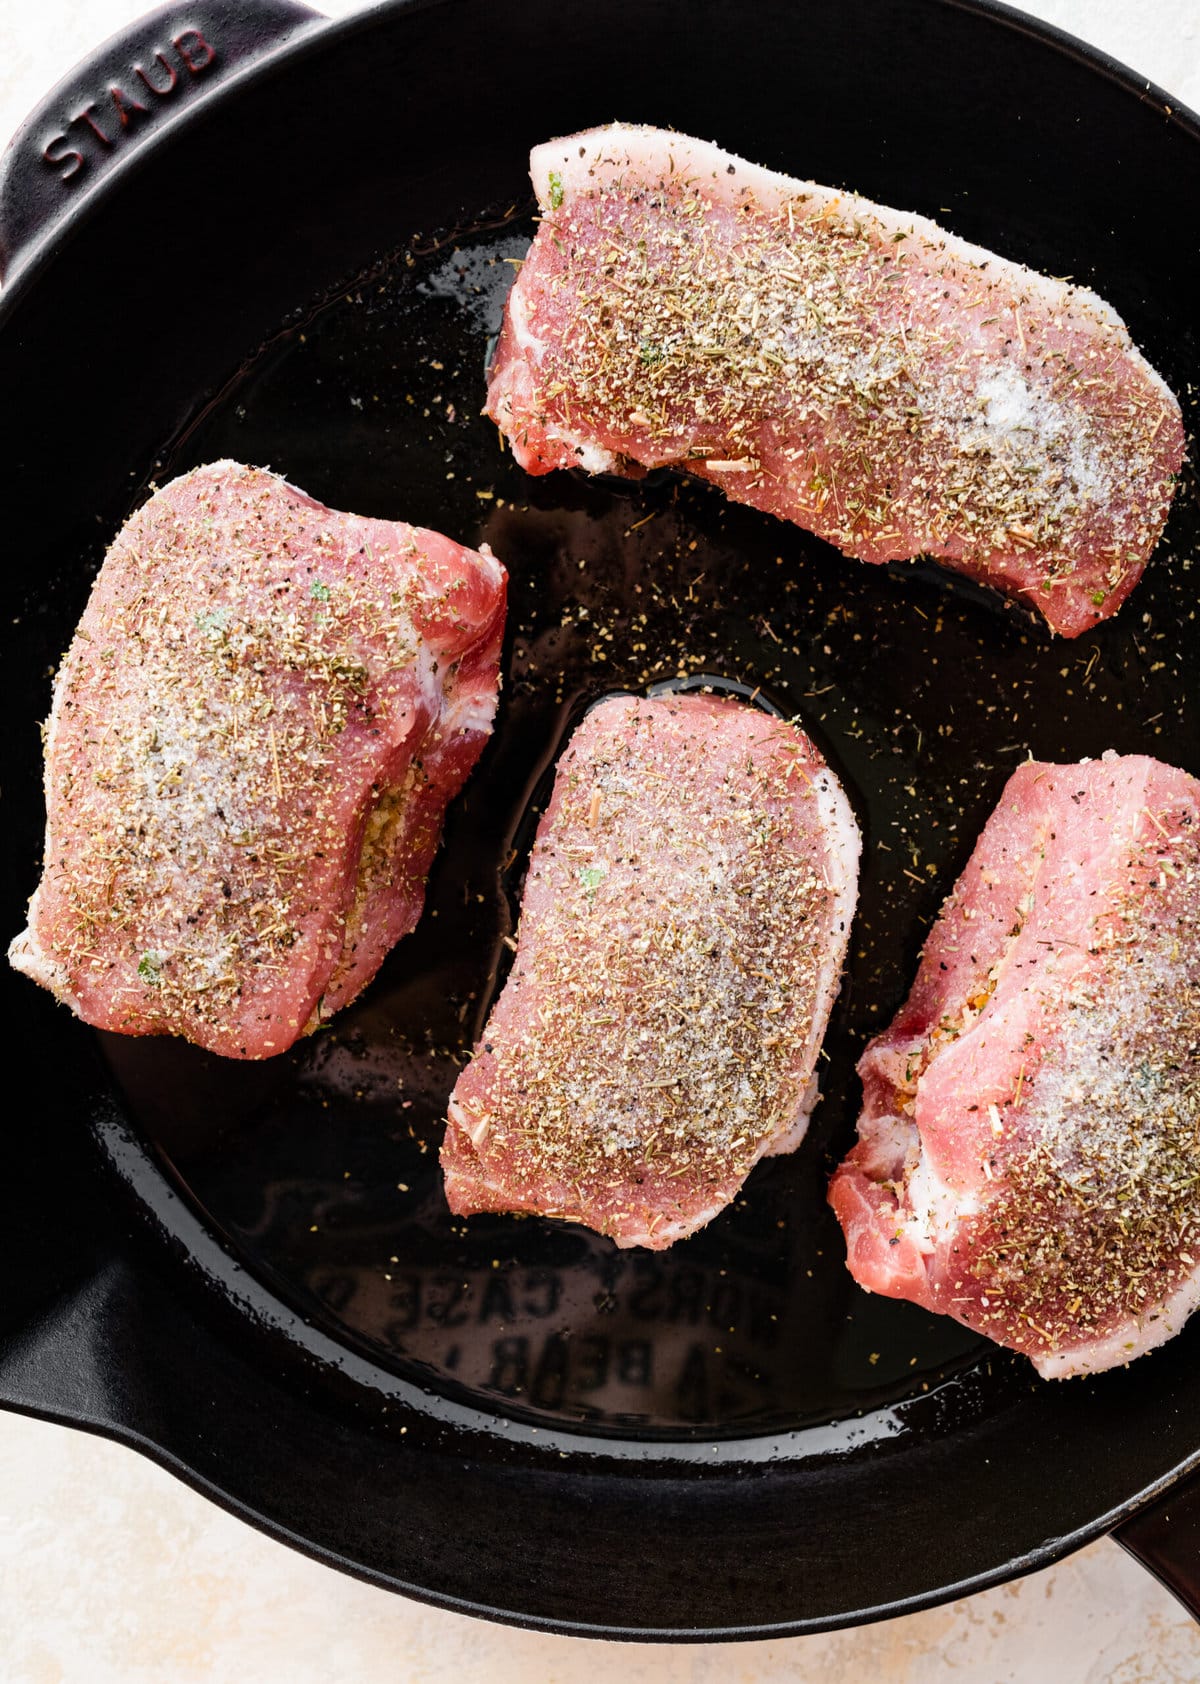 how to make Oven Baked Stuffed Pork Chops Recipe: Seasoned the outside of the pork chops and frying on cast iron skillet.